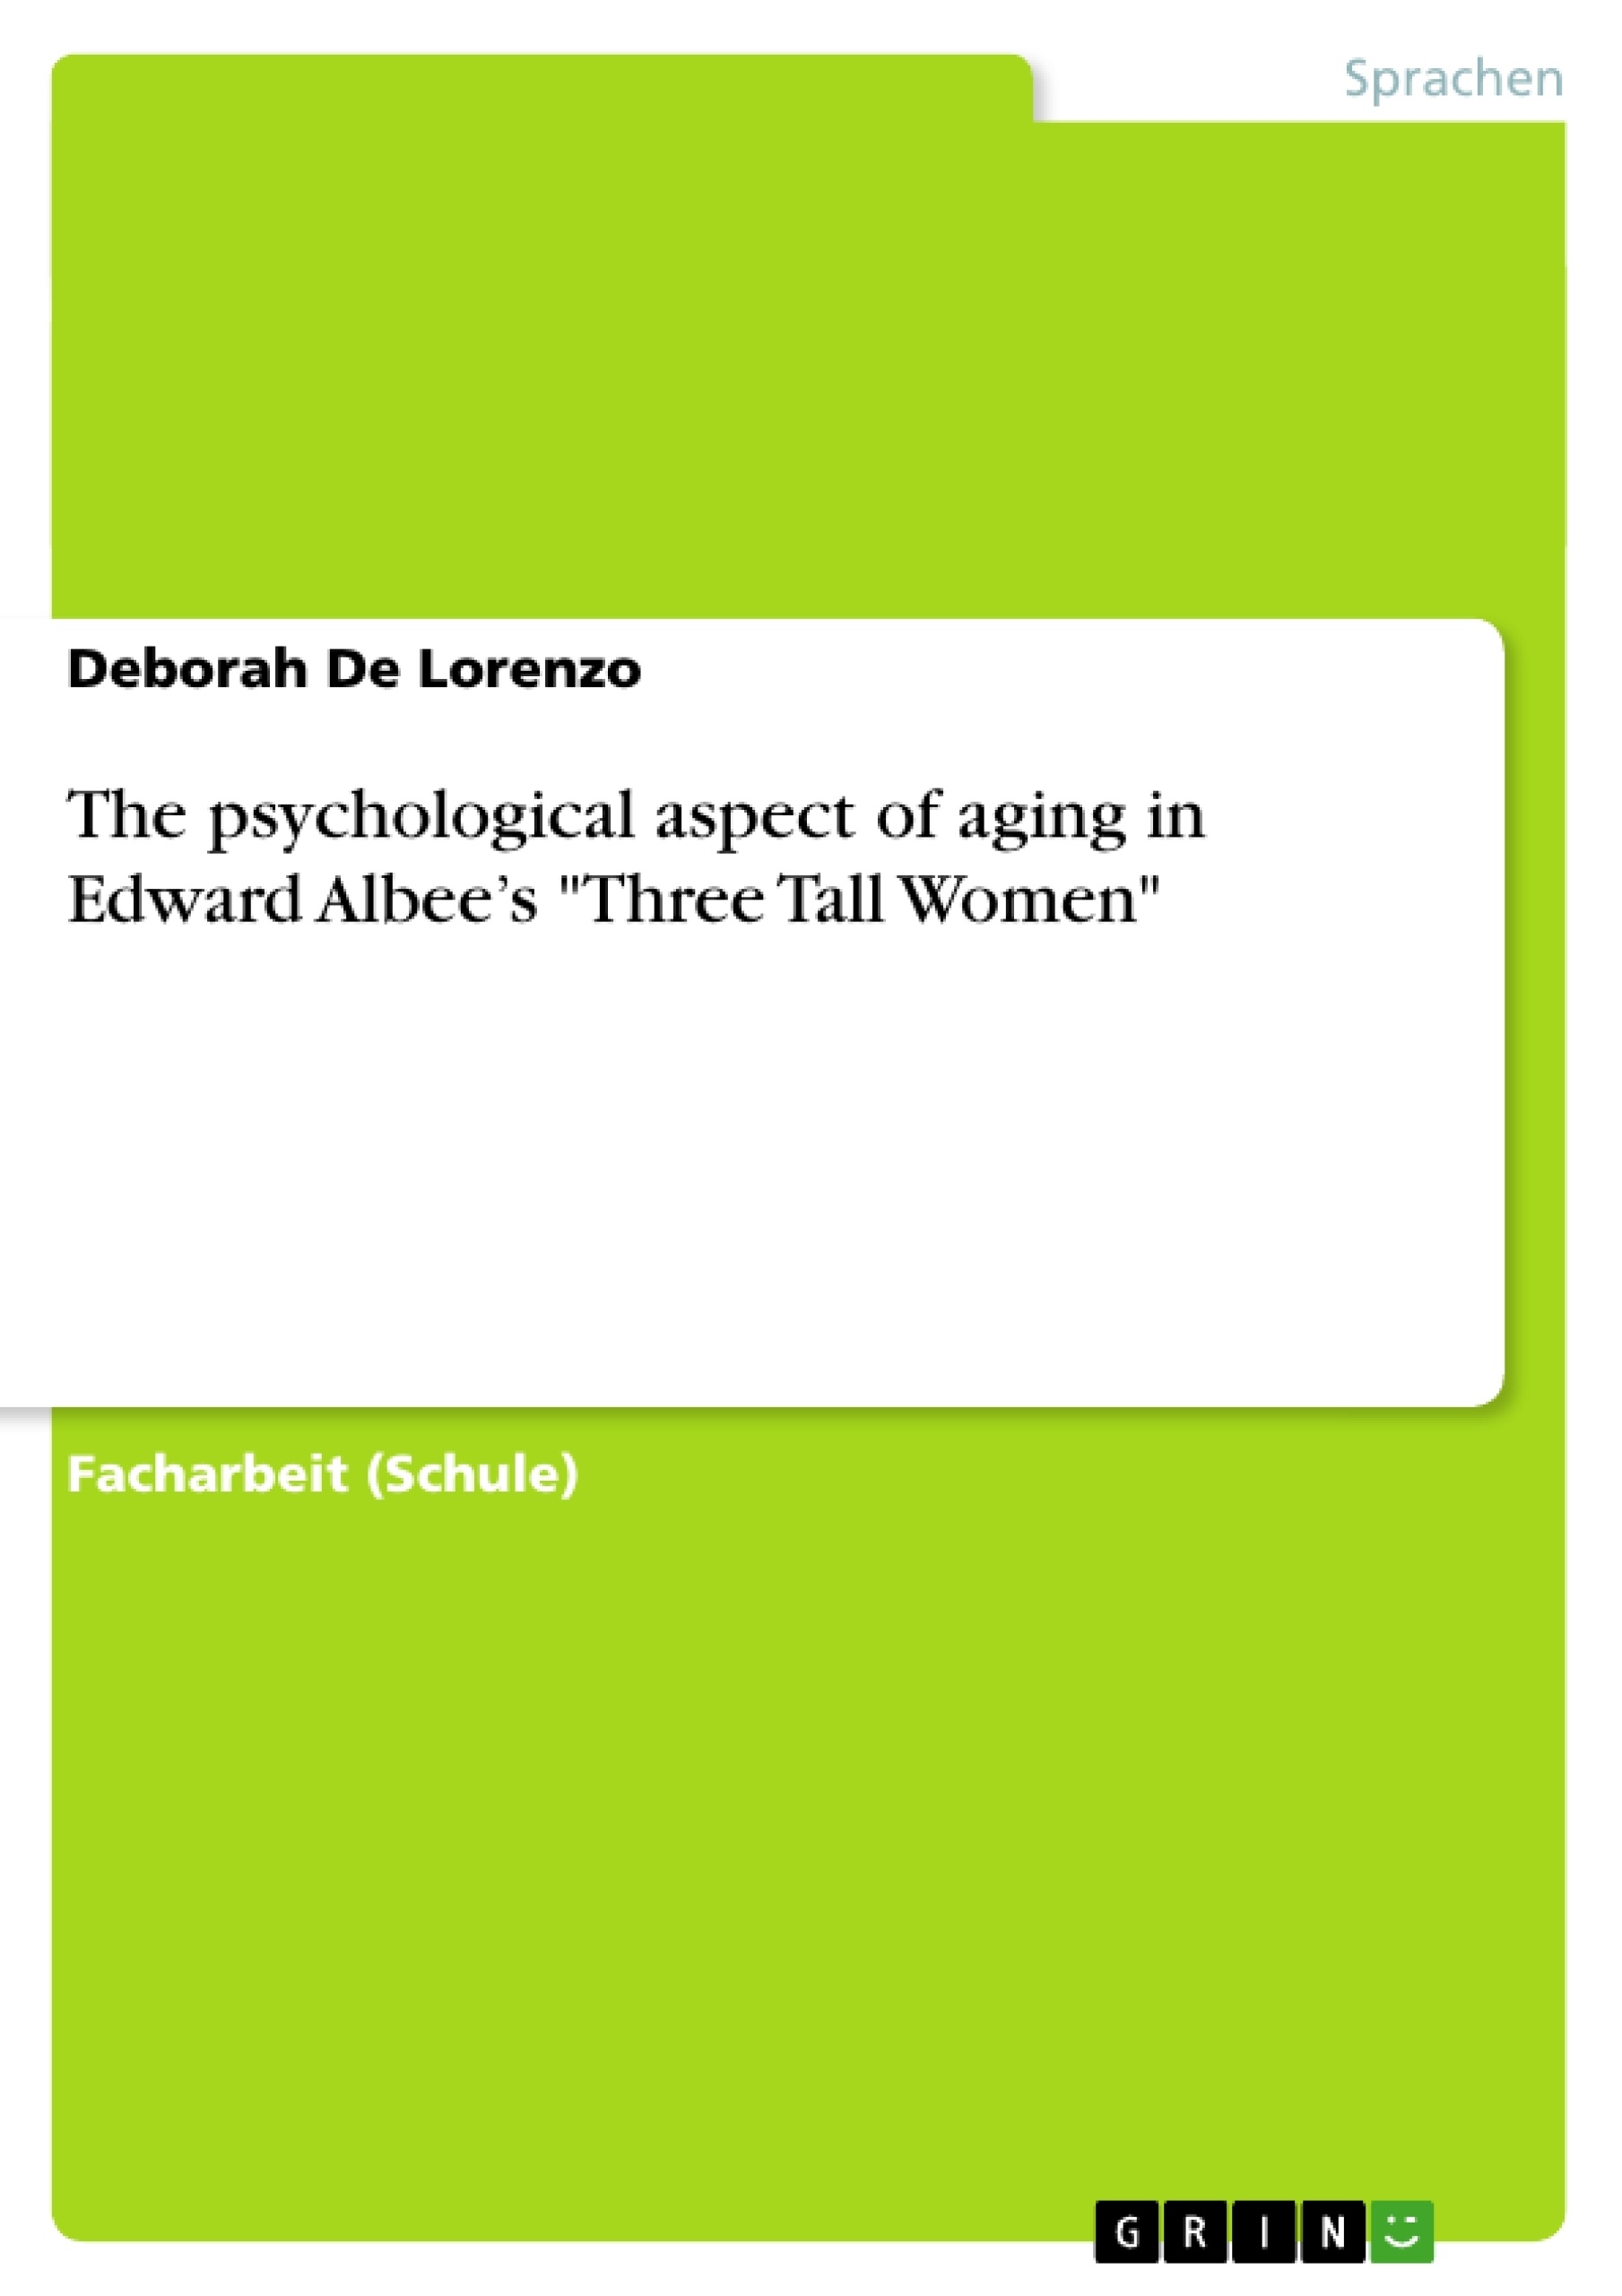 Titel: The psychological aspect of aging in Edward Albee’s "Three Tall Women"